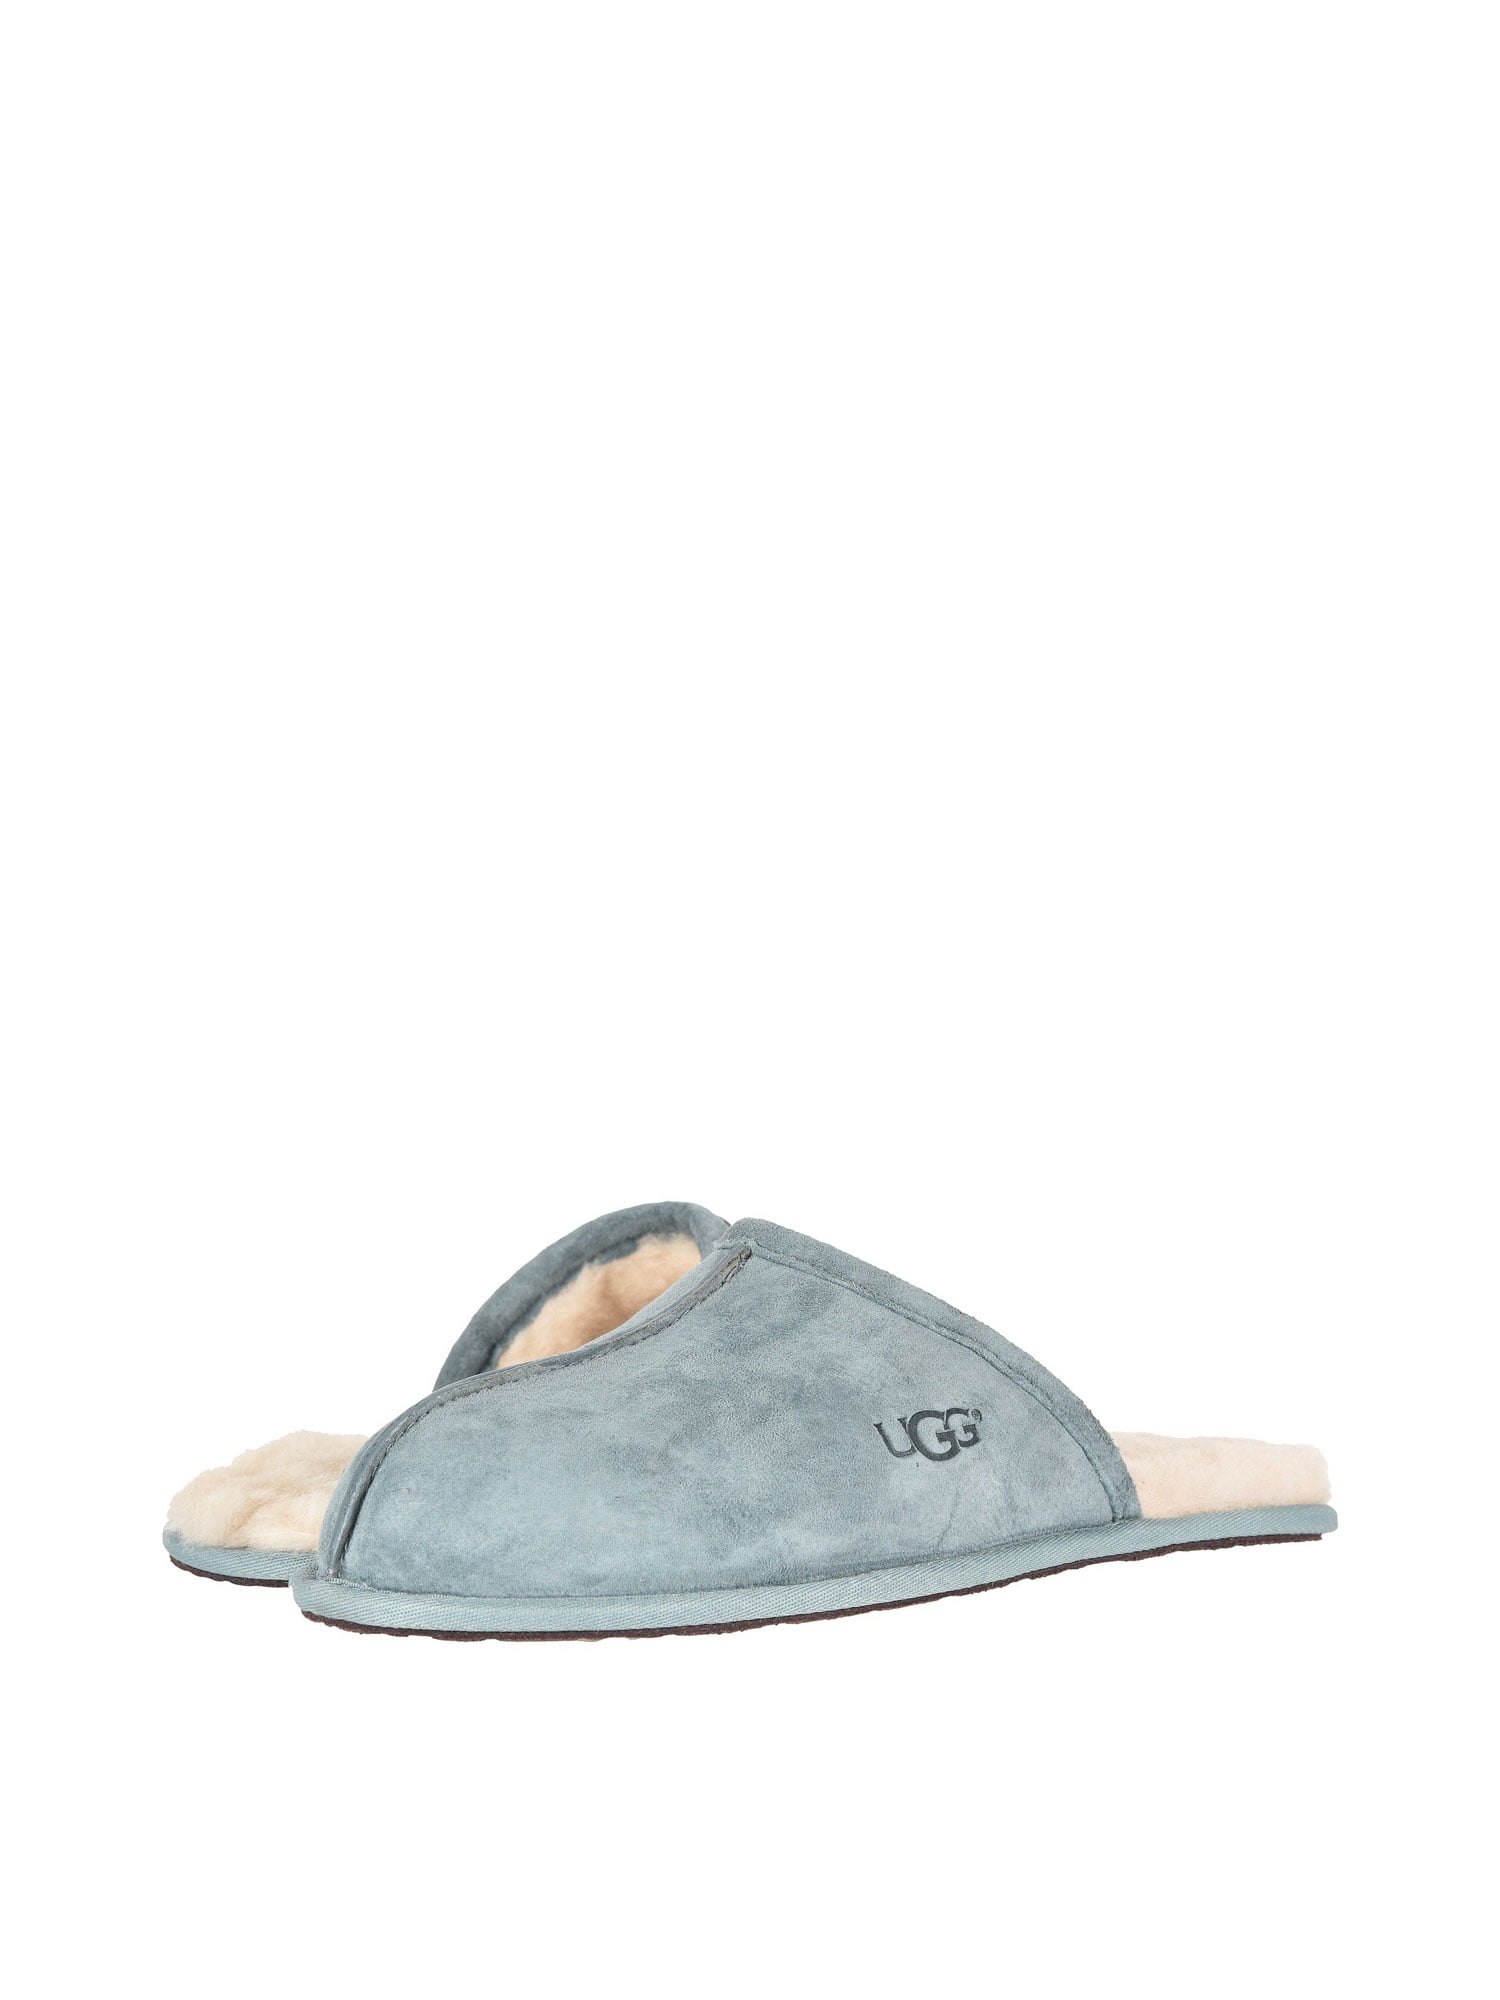 mens ugg scuff leather slippers